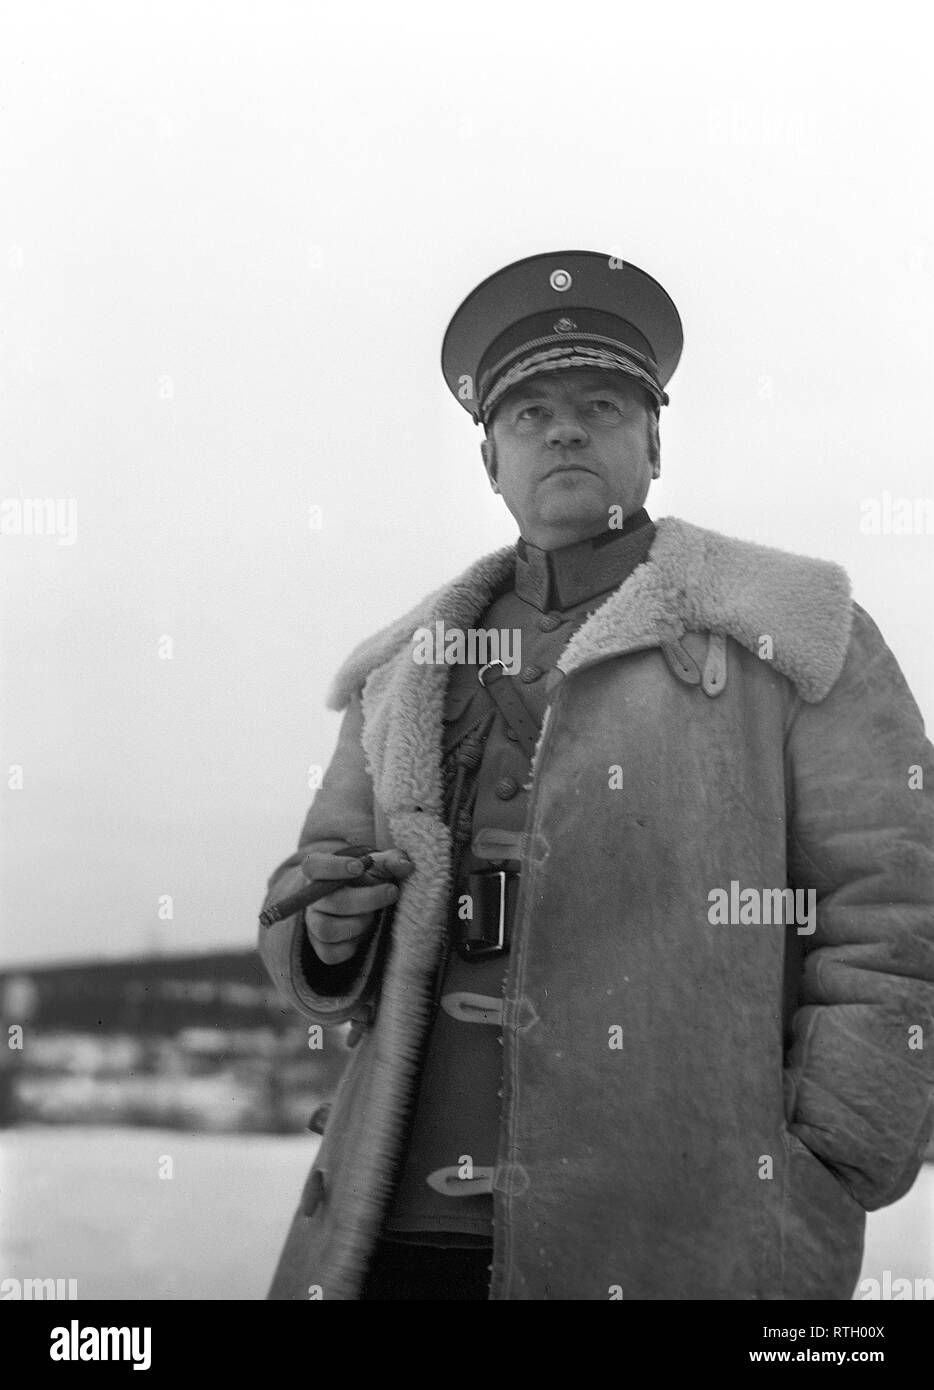 The Winter War. A military conflict between the Soviet union and Finland. It began with a Soviet invasion on november 1939 when Soviet infantery crossed the border on the Karelian Isthmus. About 9500 Swedish volunteer soldiers participated in the war. Here at Rovaniemi, North Finland. Finnish Major General Kurt Wallenius, 1893-1984. He was appointed Commander of the Lapland Group by Gustaf Mannerheim who was commander-in-chief of Finland's defence. The Lapland Group though outnumbered, repulsed Soviet troops at Salla and Petsamo.  January 1940. Photo Kristoffersson ref 95-2. Stock Photo